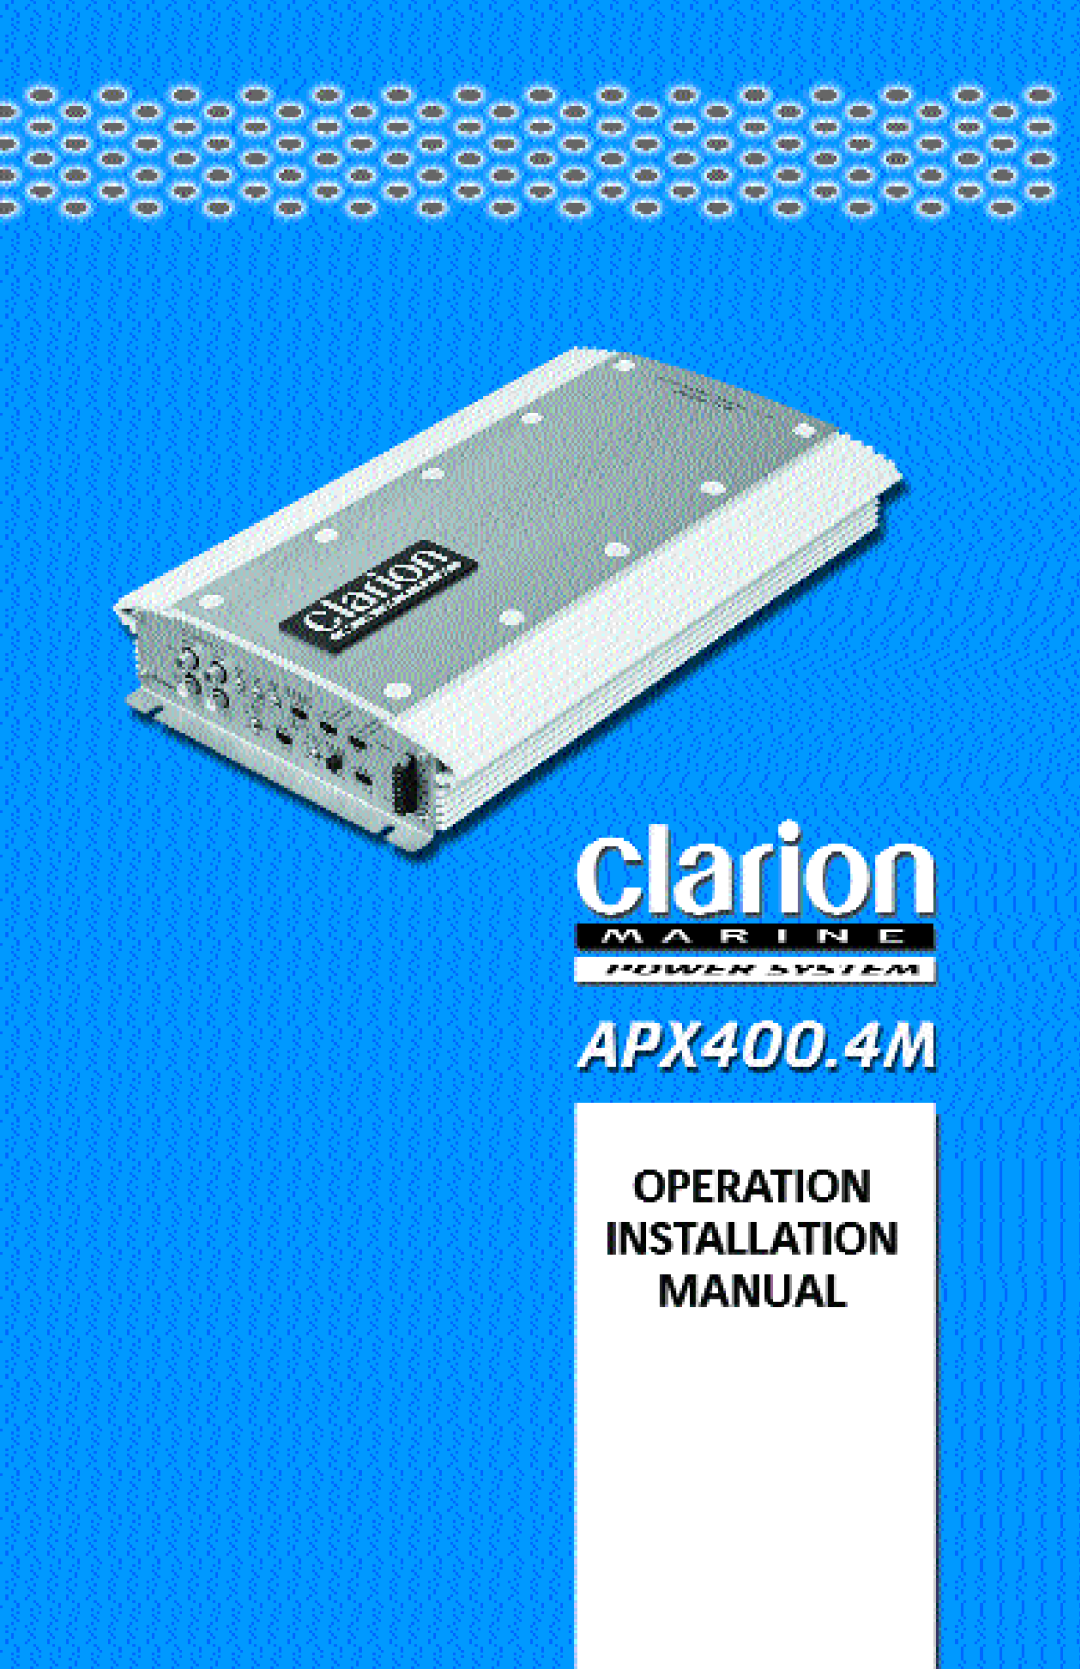 Clarion APX400 manual 